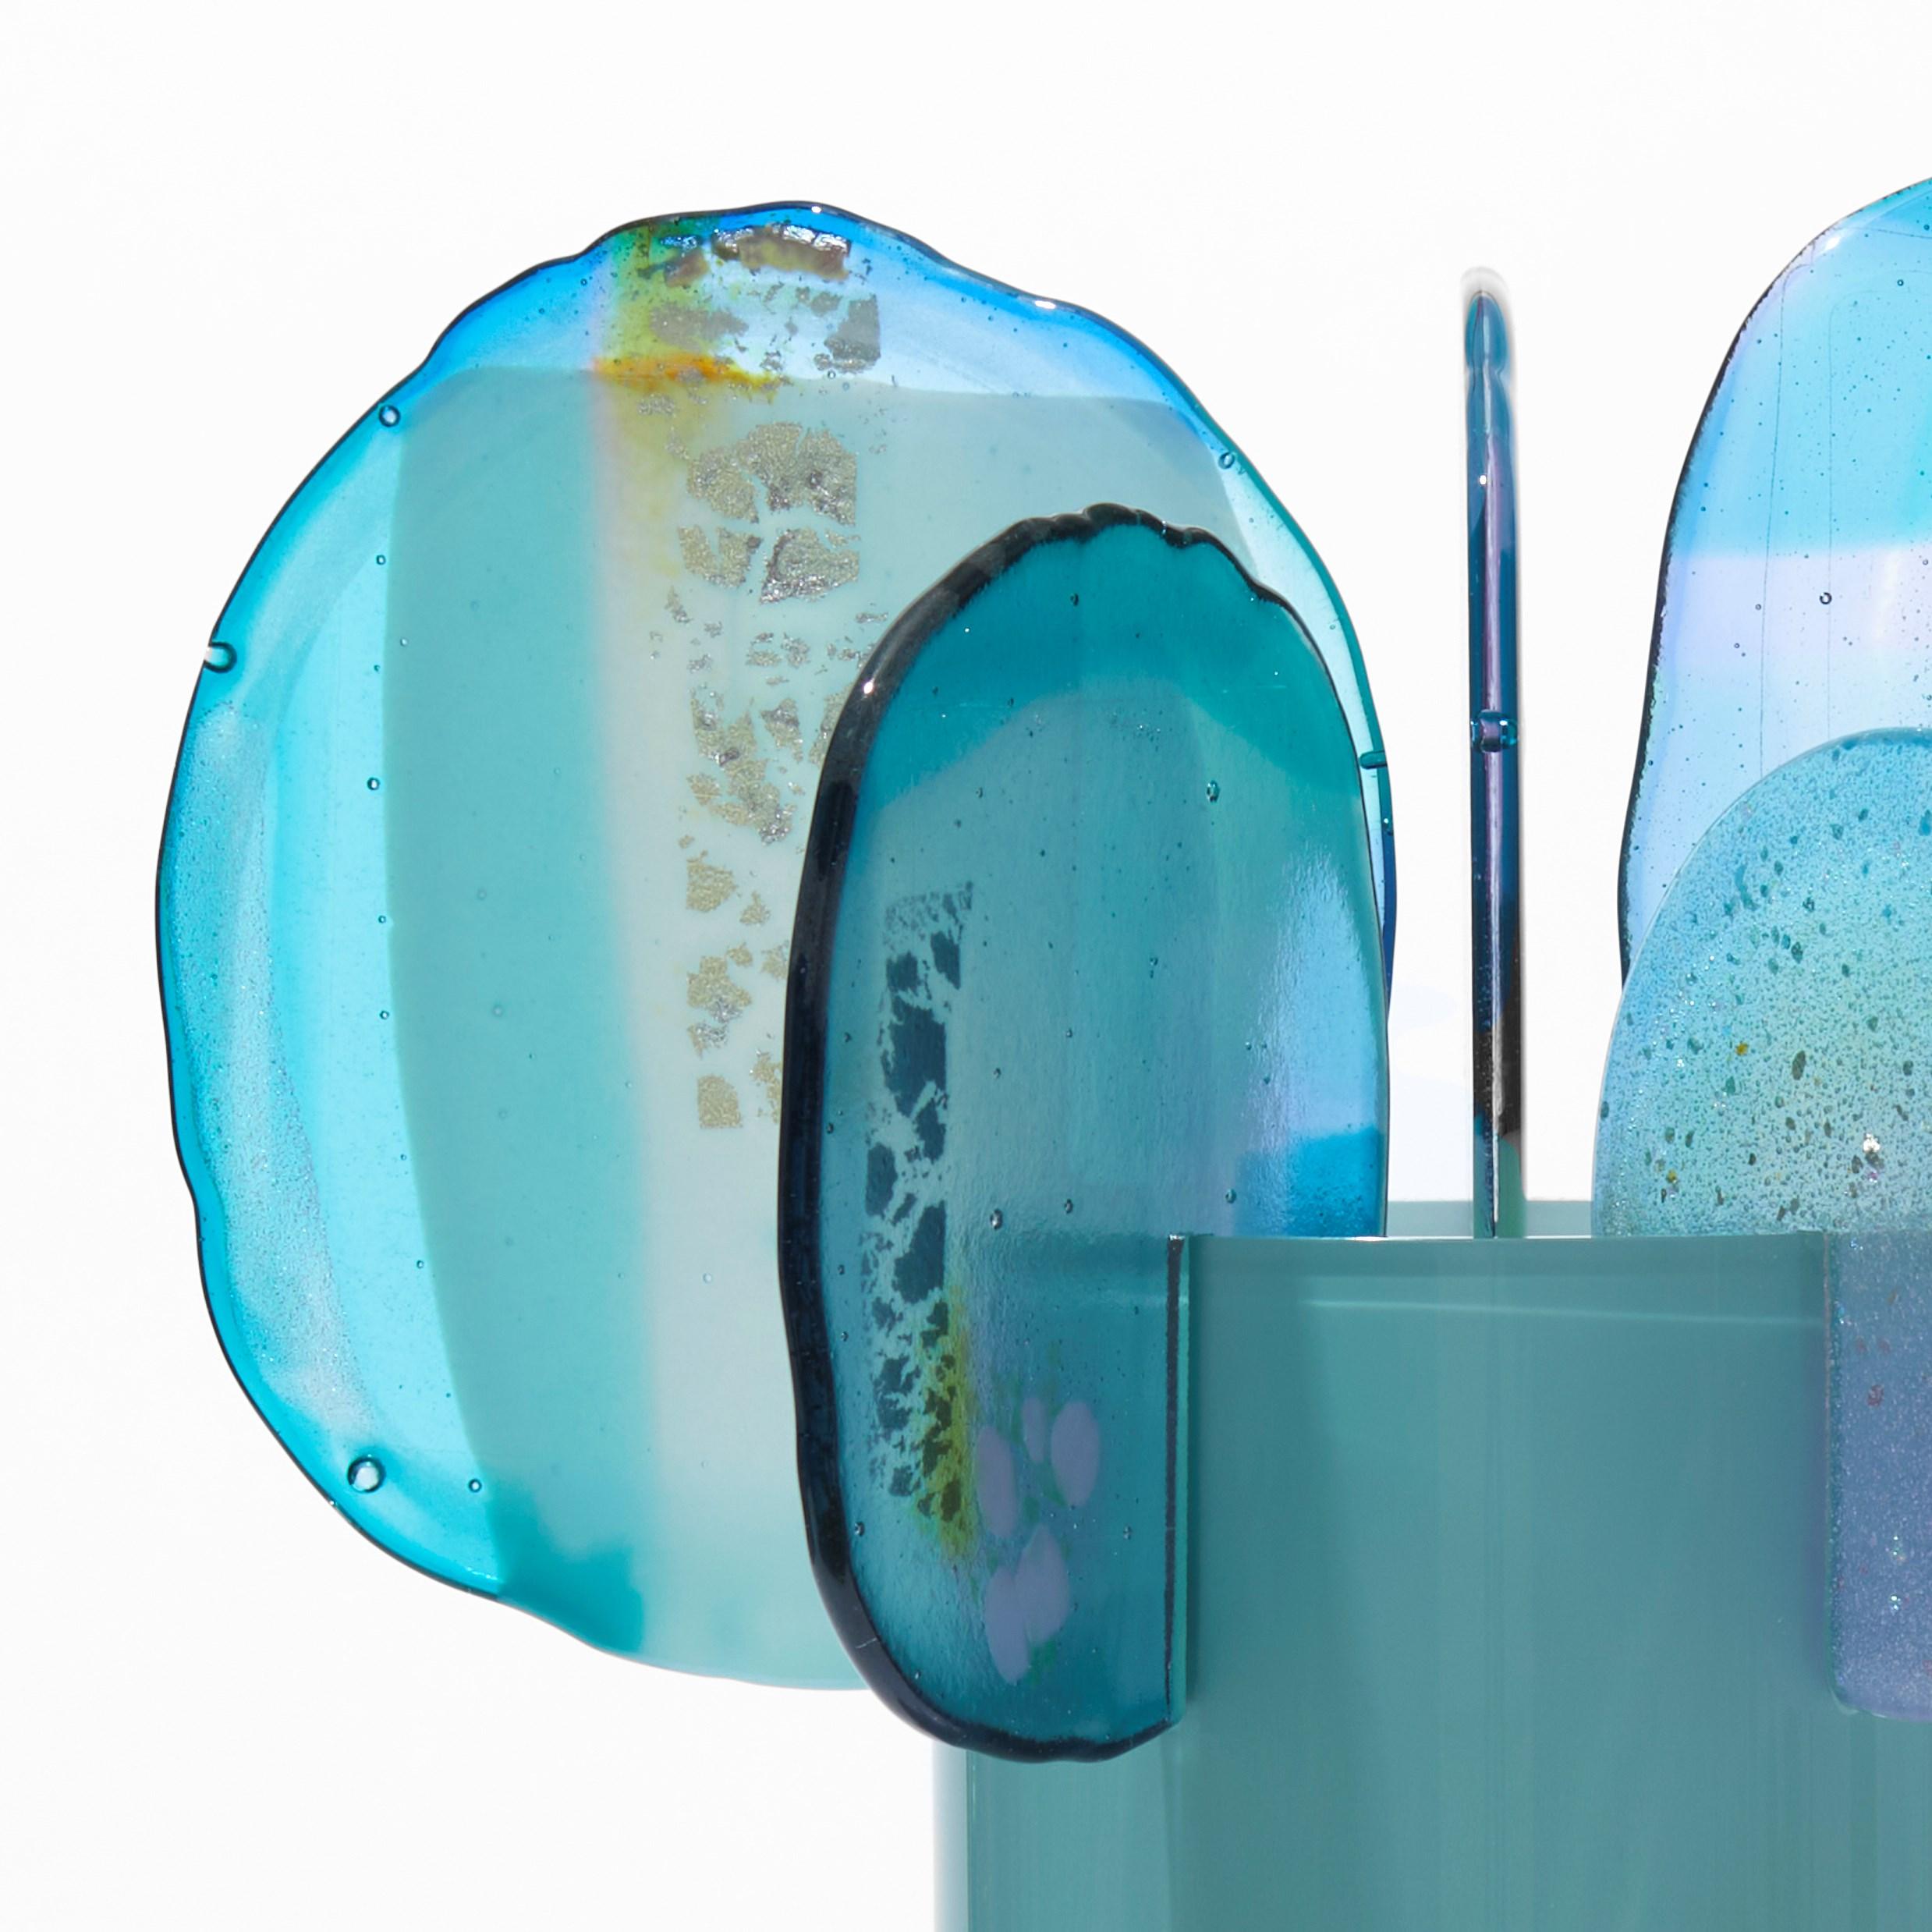 Hand-Crafted Paradise 08 in Jadeite, jade, aqua, blue & lilac glass sculpture by Amy Cushing For Sale